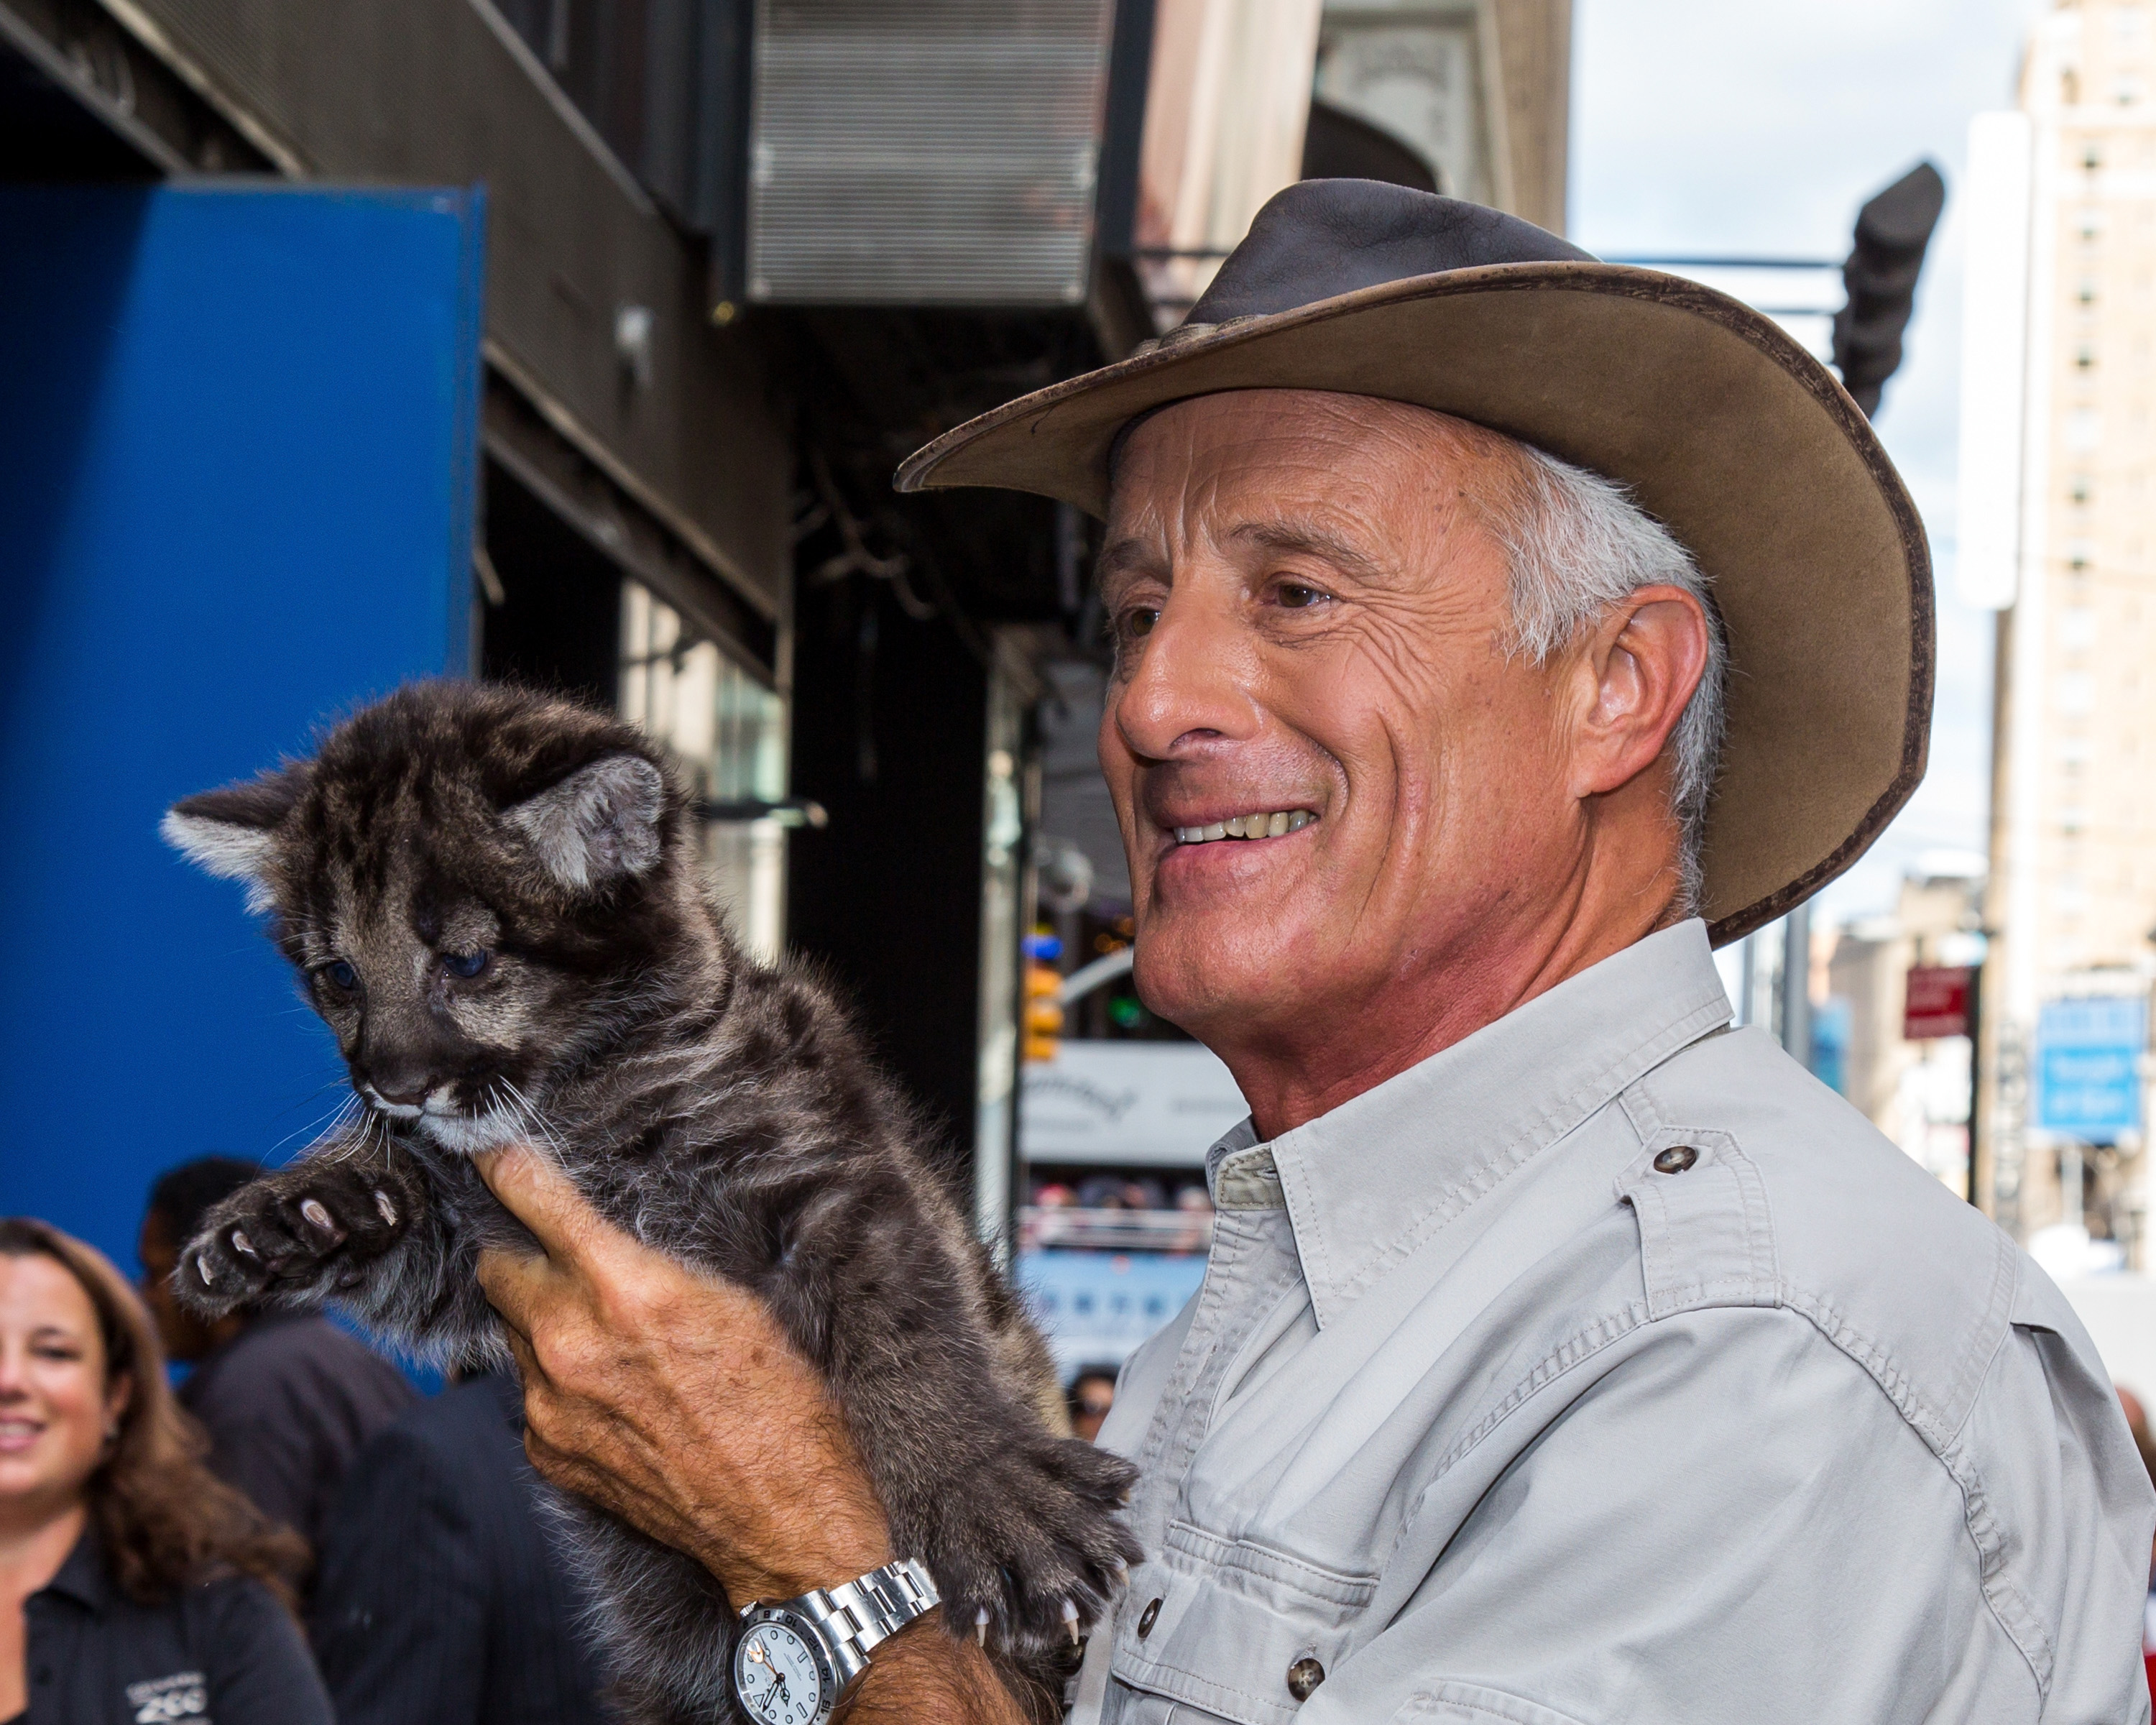 Jack Hanna is seen posing with black mountain lion cub at 'Good Morning America' on Sept. 22, 2014 in New York City.